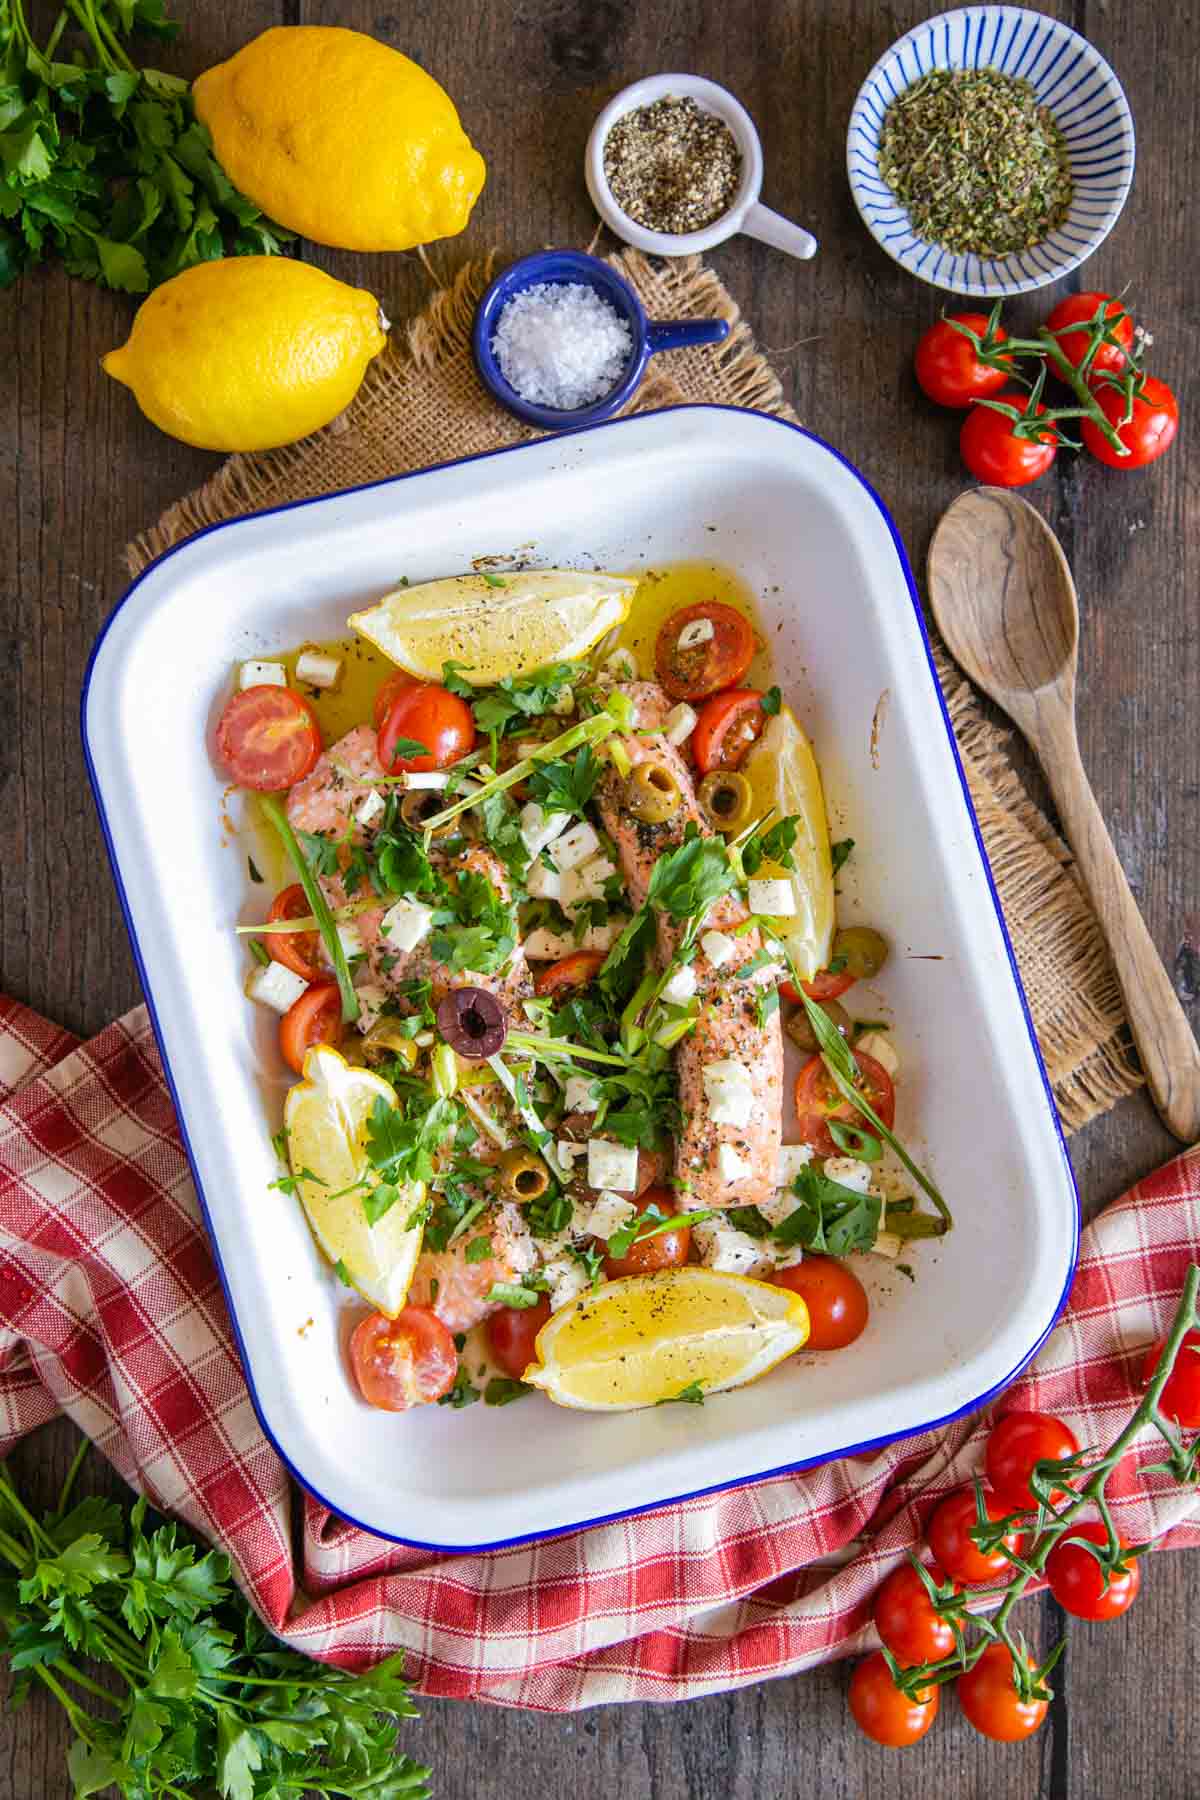 A dish of Greek salmon with feta, vegetables and lemon shown from above on the table, fresh from the oven and ready to serve.